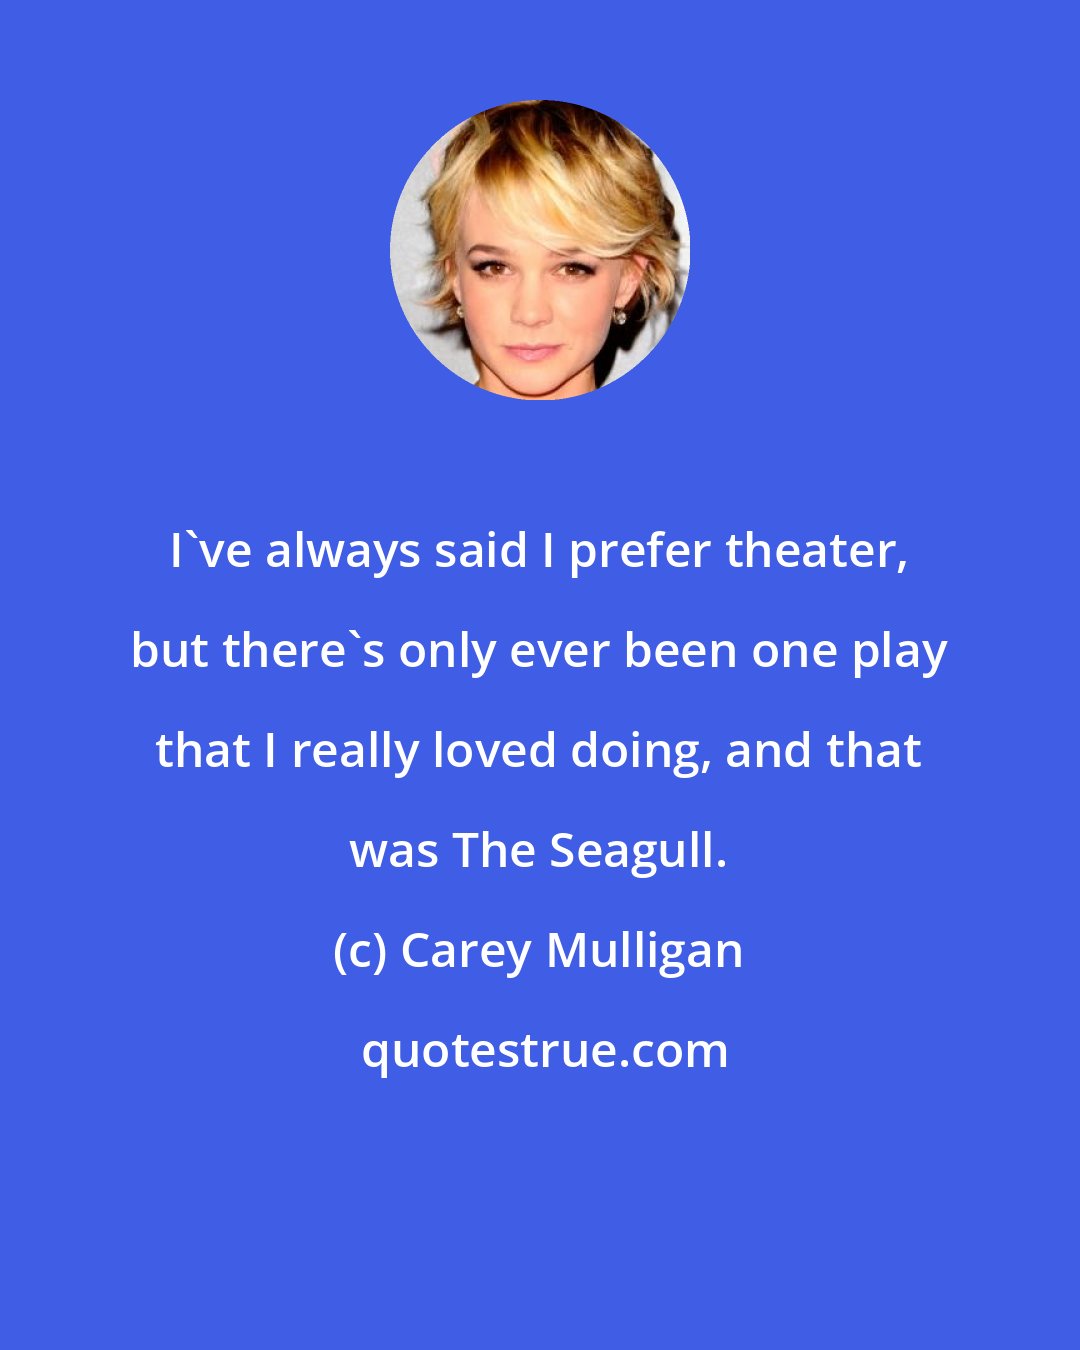 Carey Mulligan: I've always said I prefer theater, but there's only ever been one play that I really loved doing, and that was The Seagull.